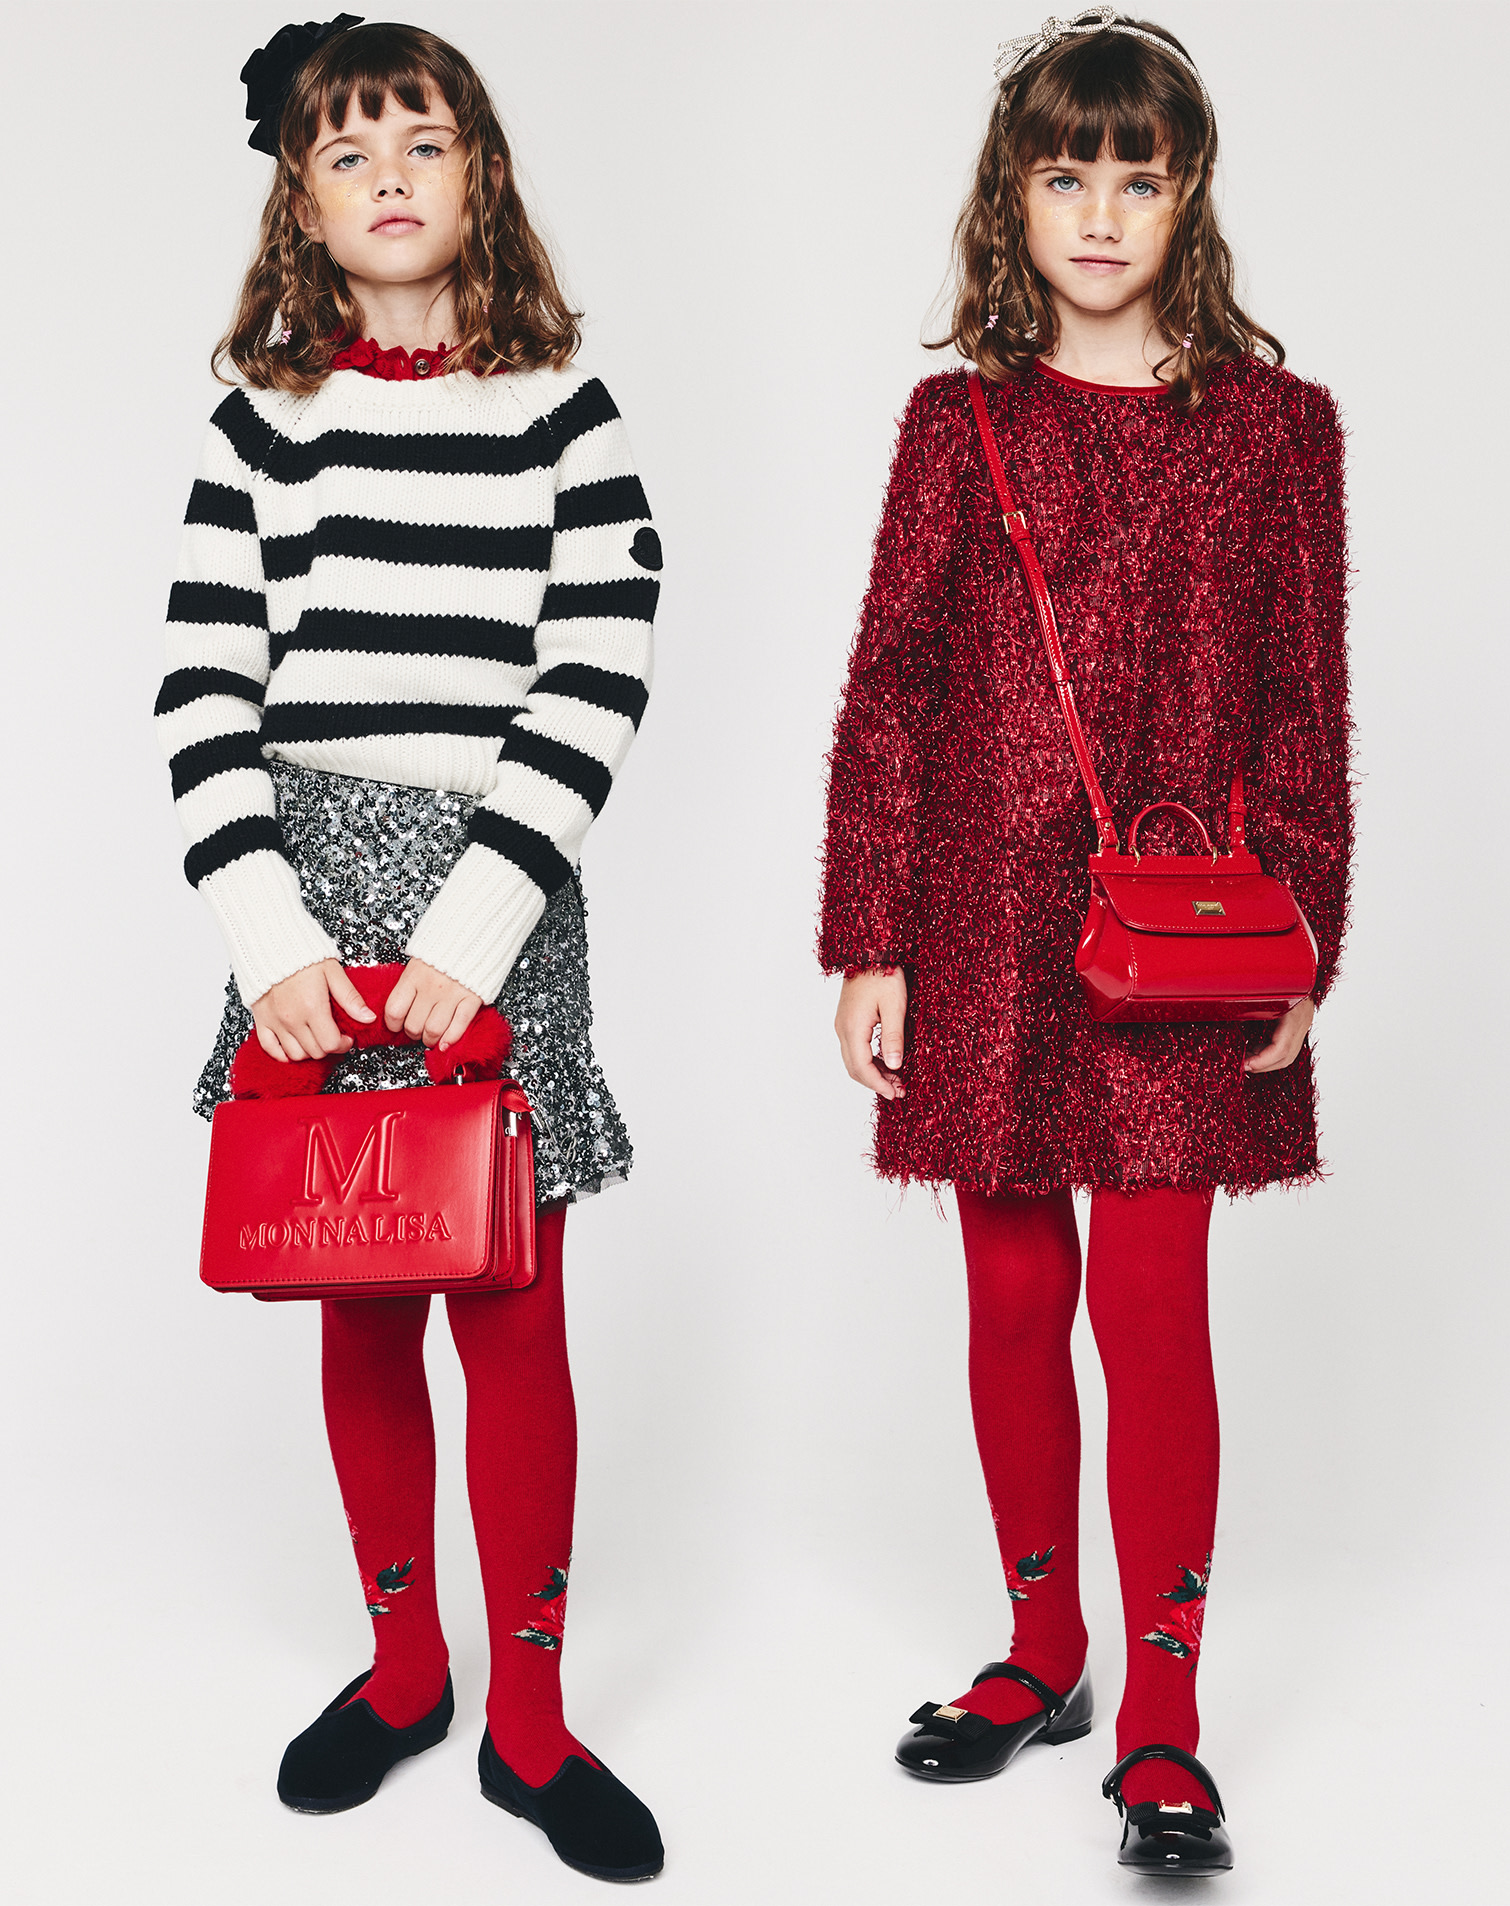 Two girls with red tights and purses